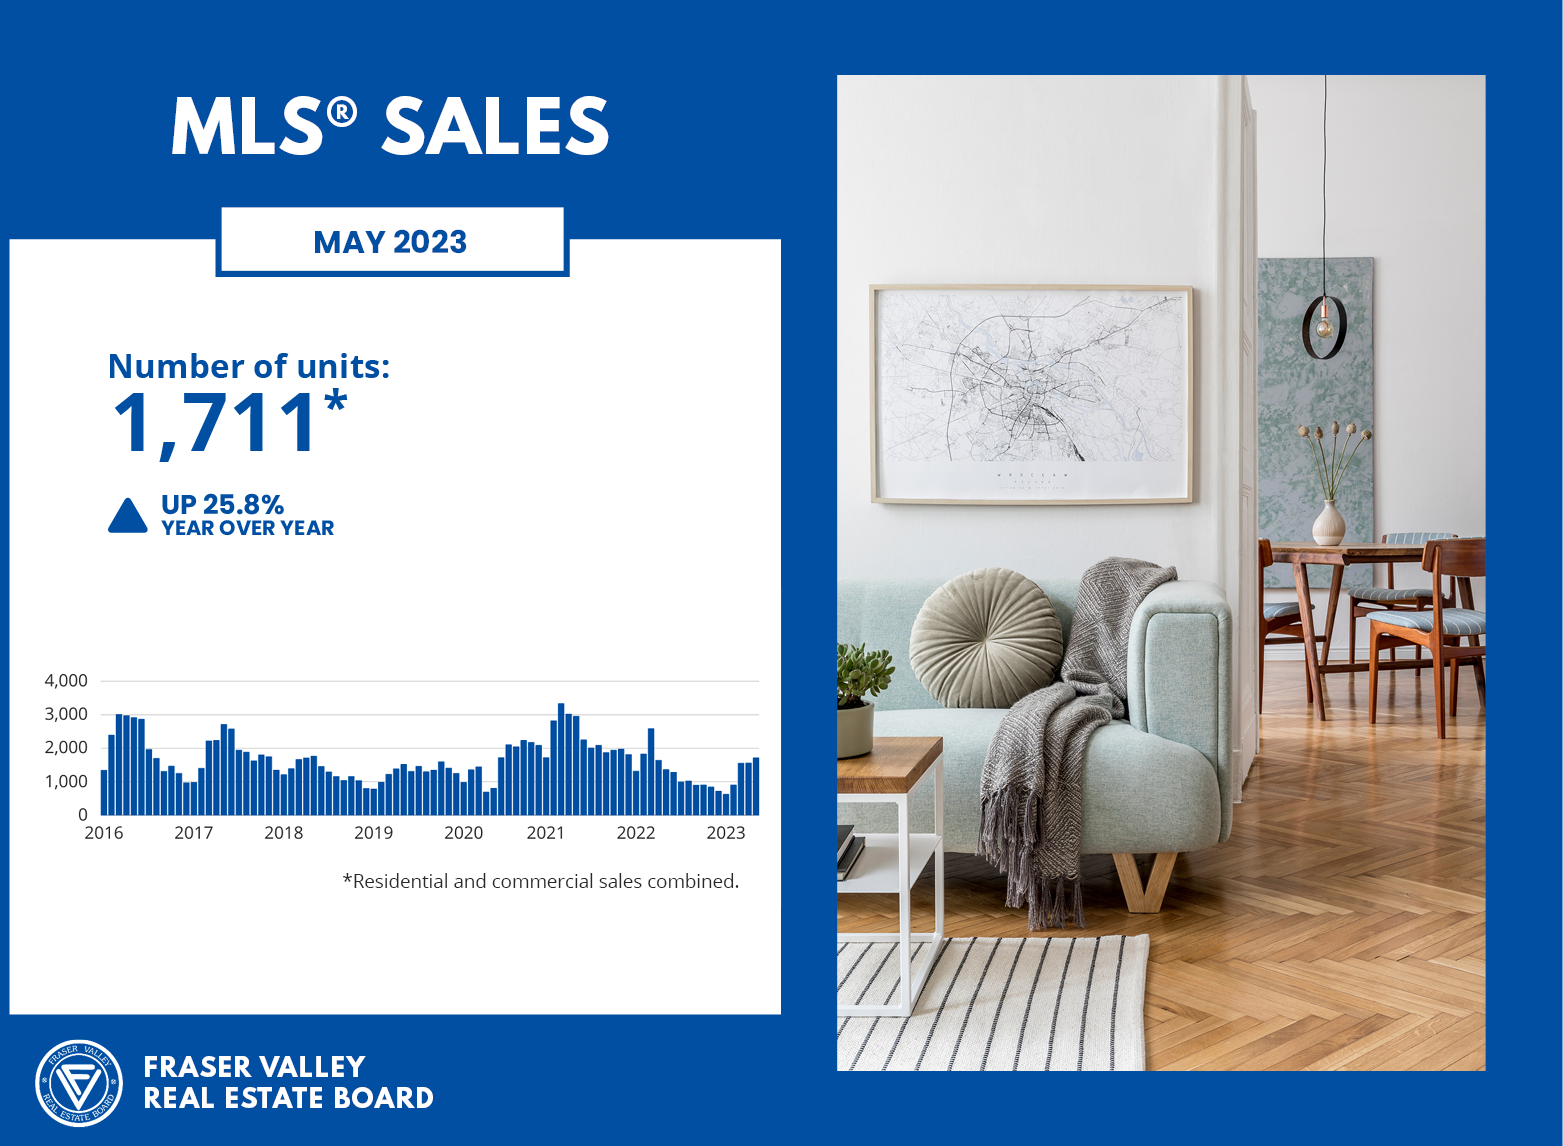 Active listings grew to 5,558, a 20 per cent increase over April, the highest month-over-month jump in more than a year.     The strong supply trend was met with healthy demand. In May, the Board processed 1,711 sales on its Multiple Listing Service®, a 10.1 per cent increase over last month and a 25.8 per cent jump over May of last year.